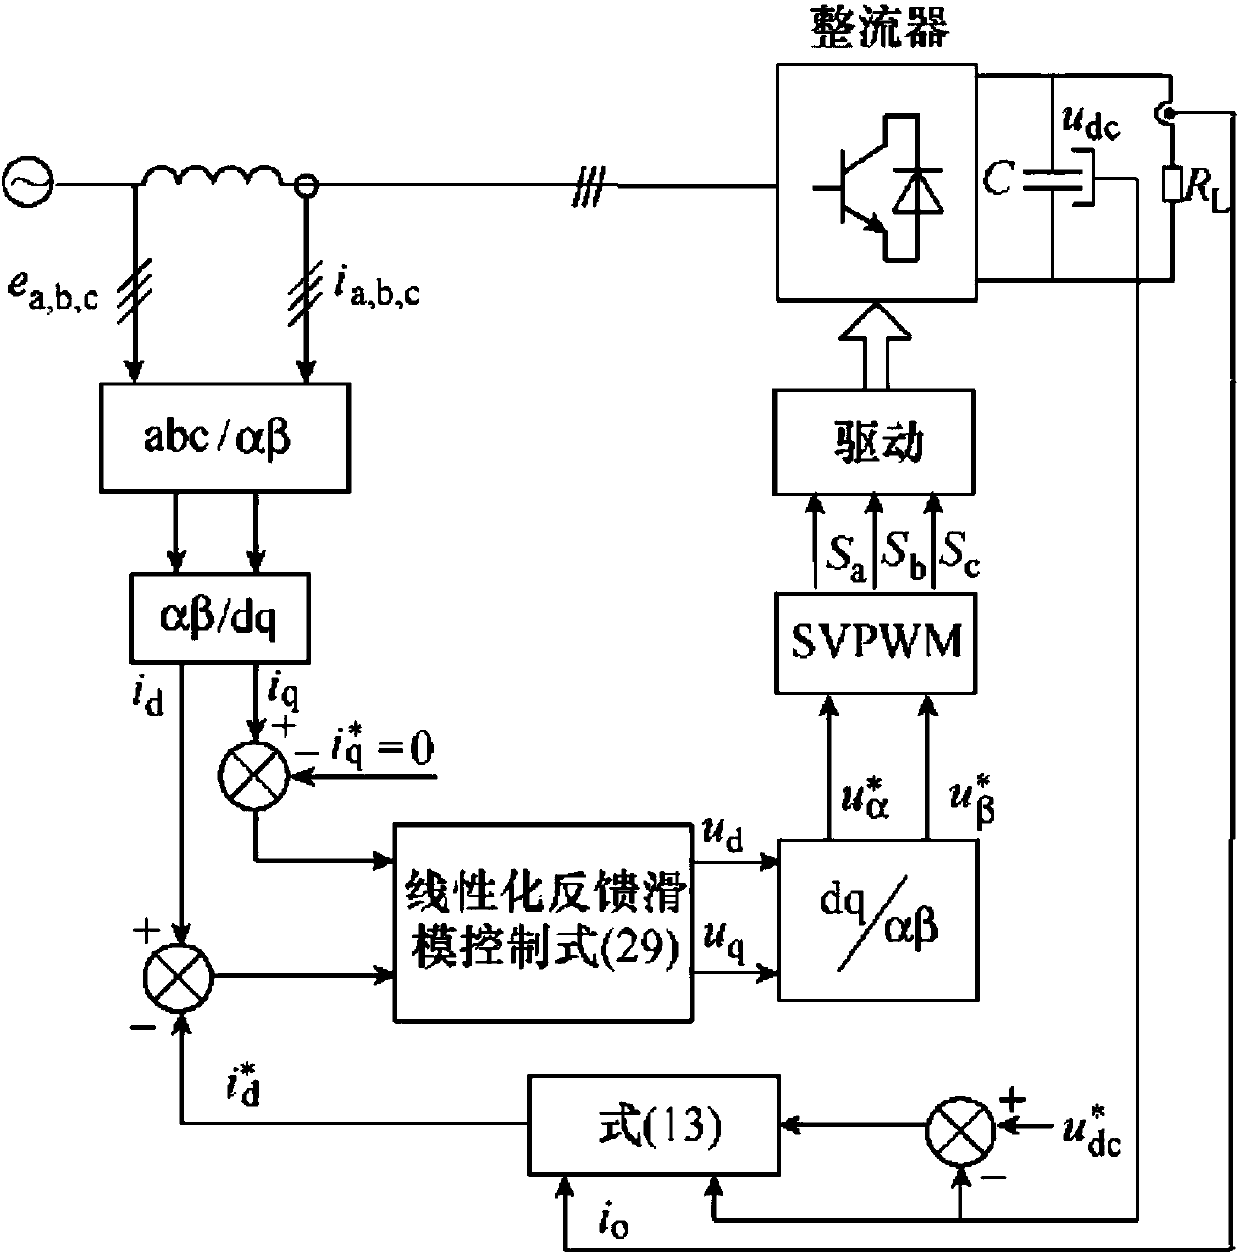 Three-phase PWM rectifier based on multi-sliding-mode variable structure control